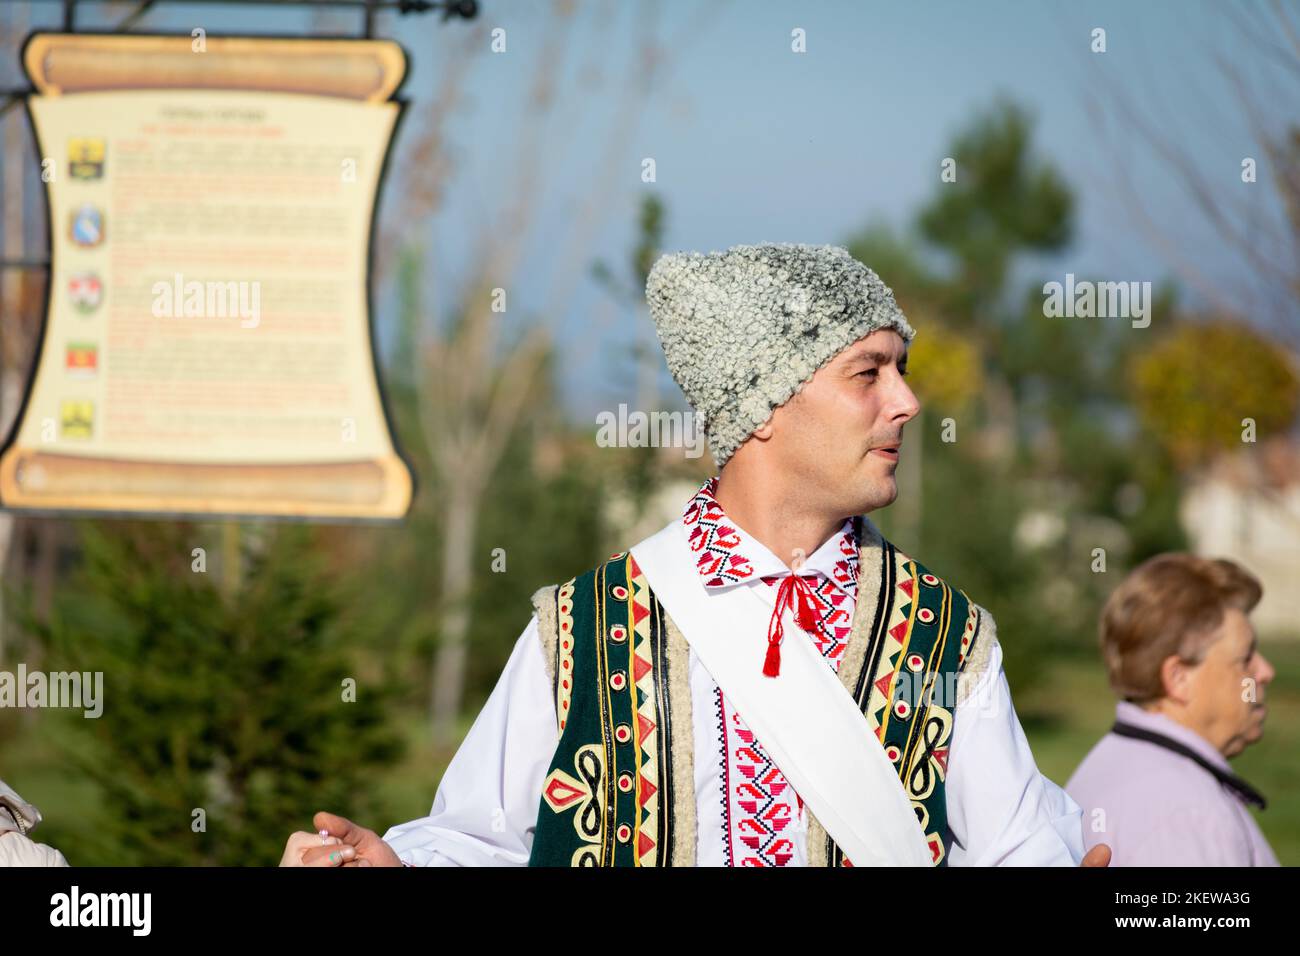 Bendery, Moldova - November 12, 2022: Man of European appearance in a national Mordovian costume dances traditional Chora dance during the Wine Day. s Stock Photo